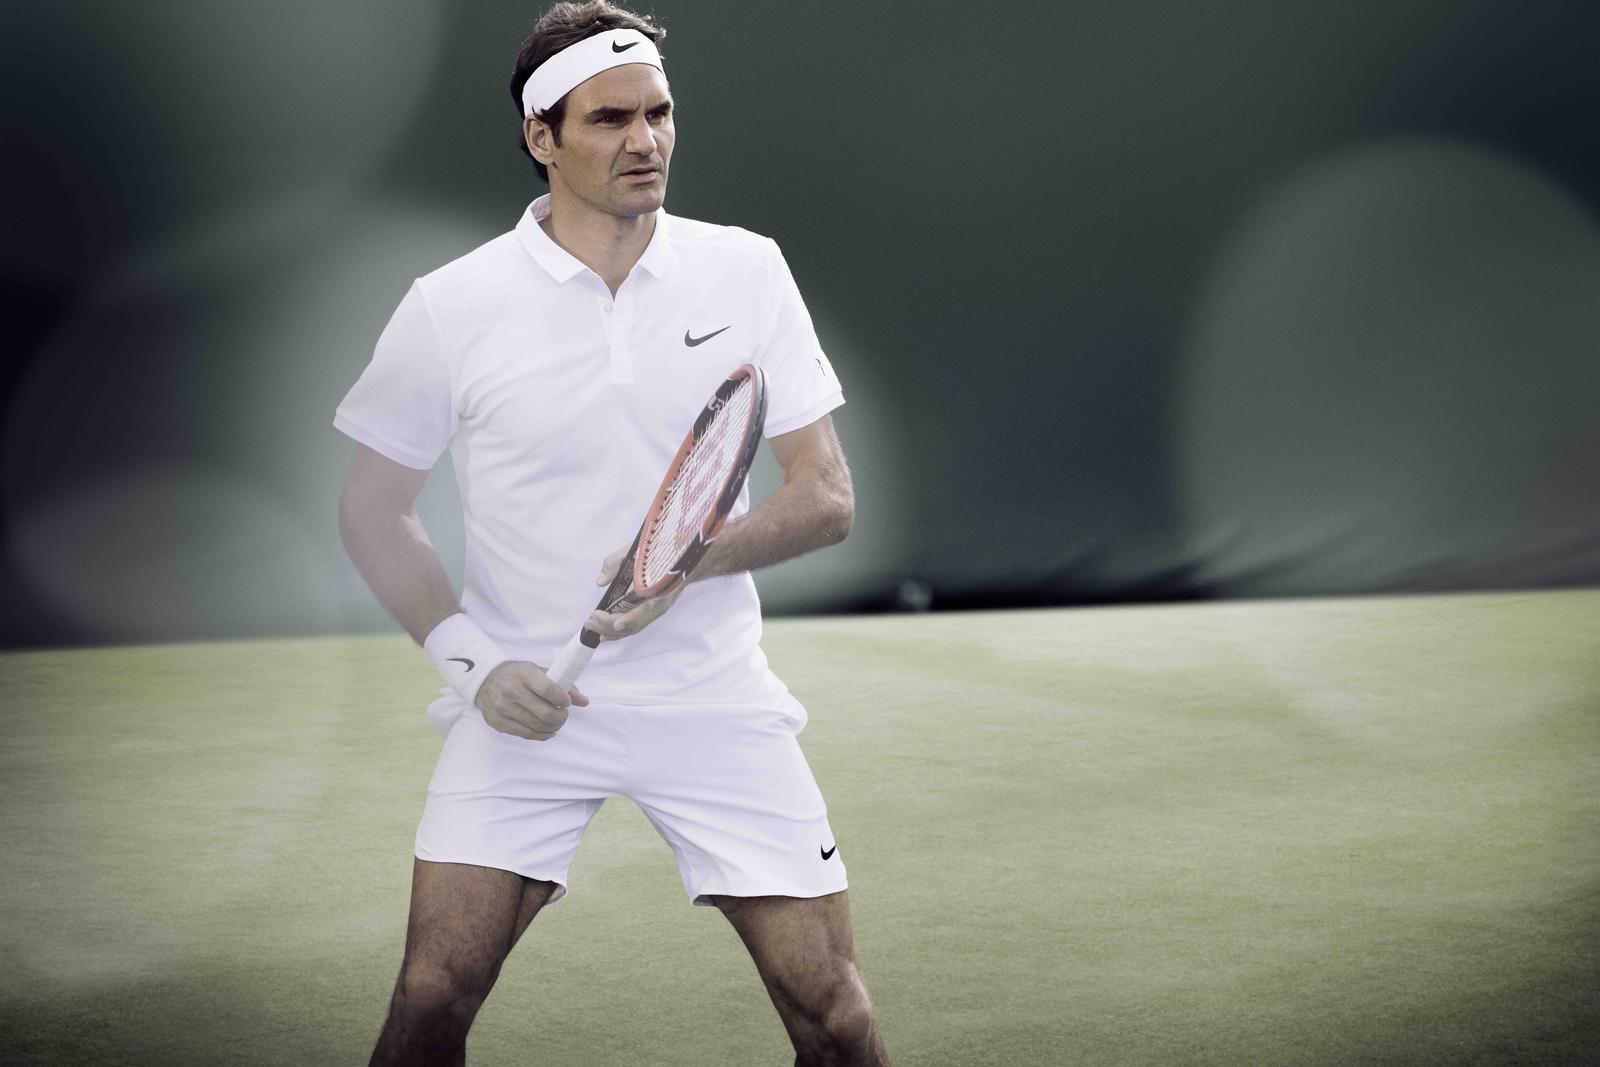 federer nike outfit